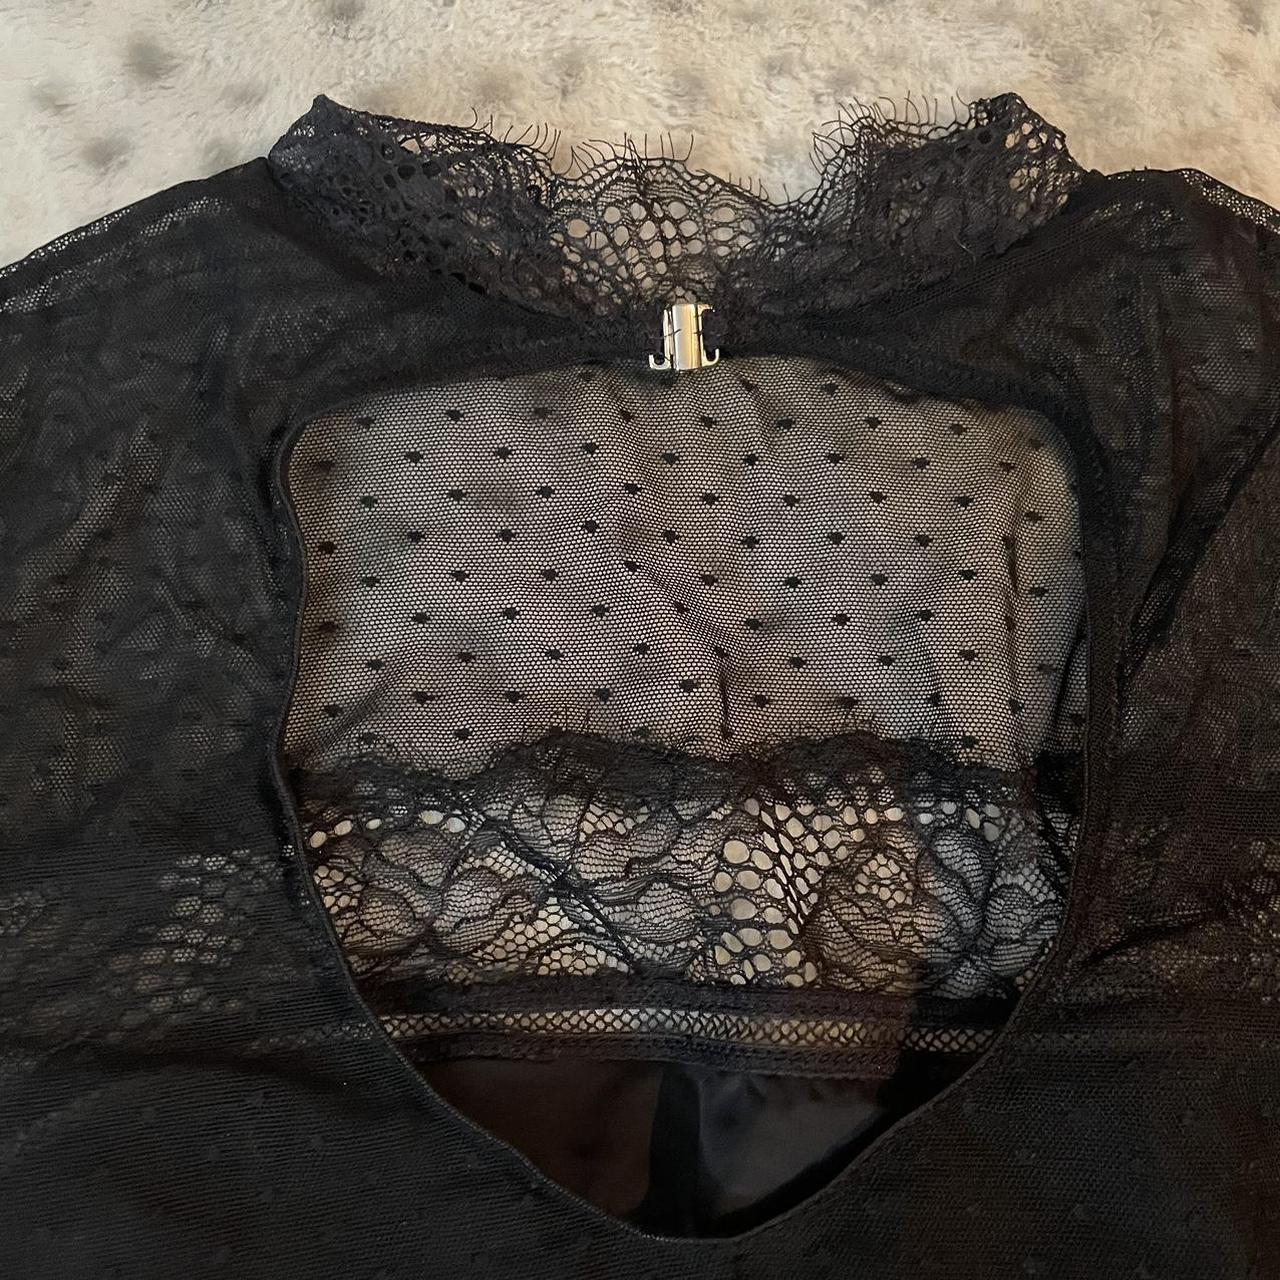 Thistle & spire black lace body suit small new - Depop